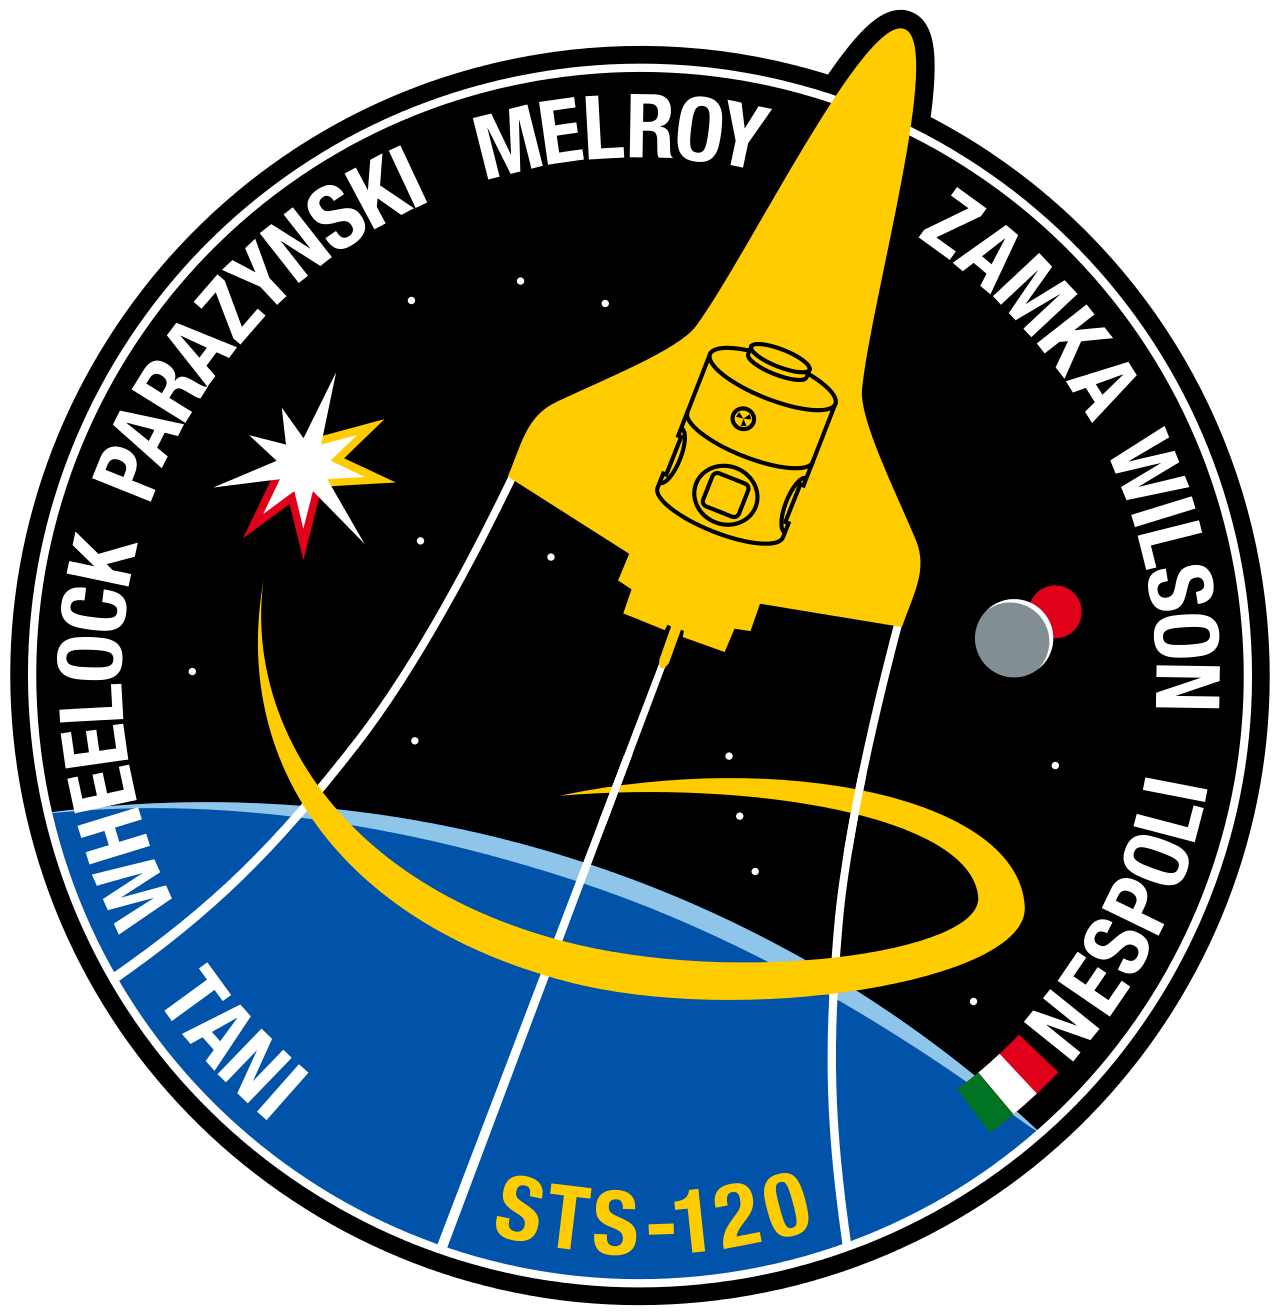 Mission patch for STS-120